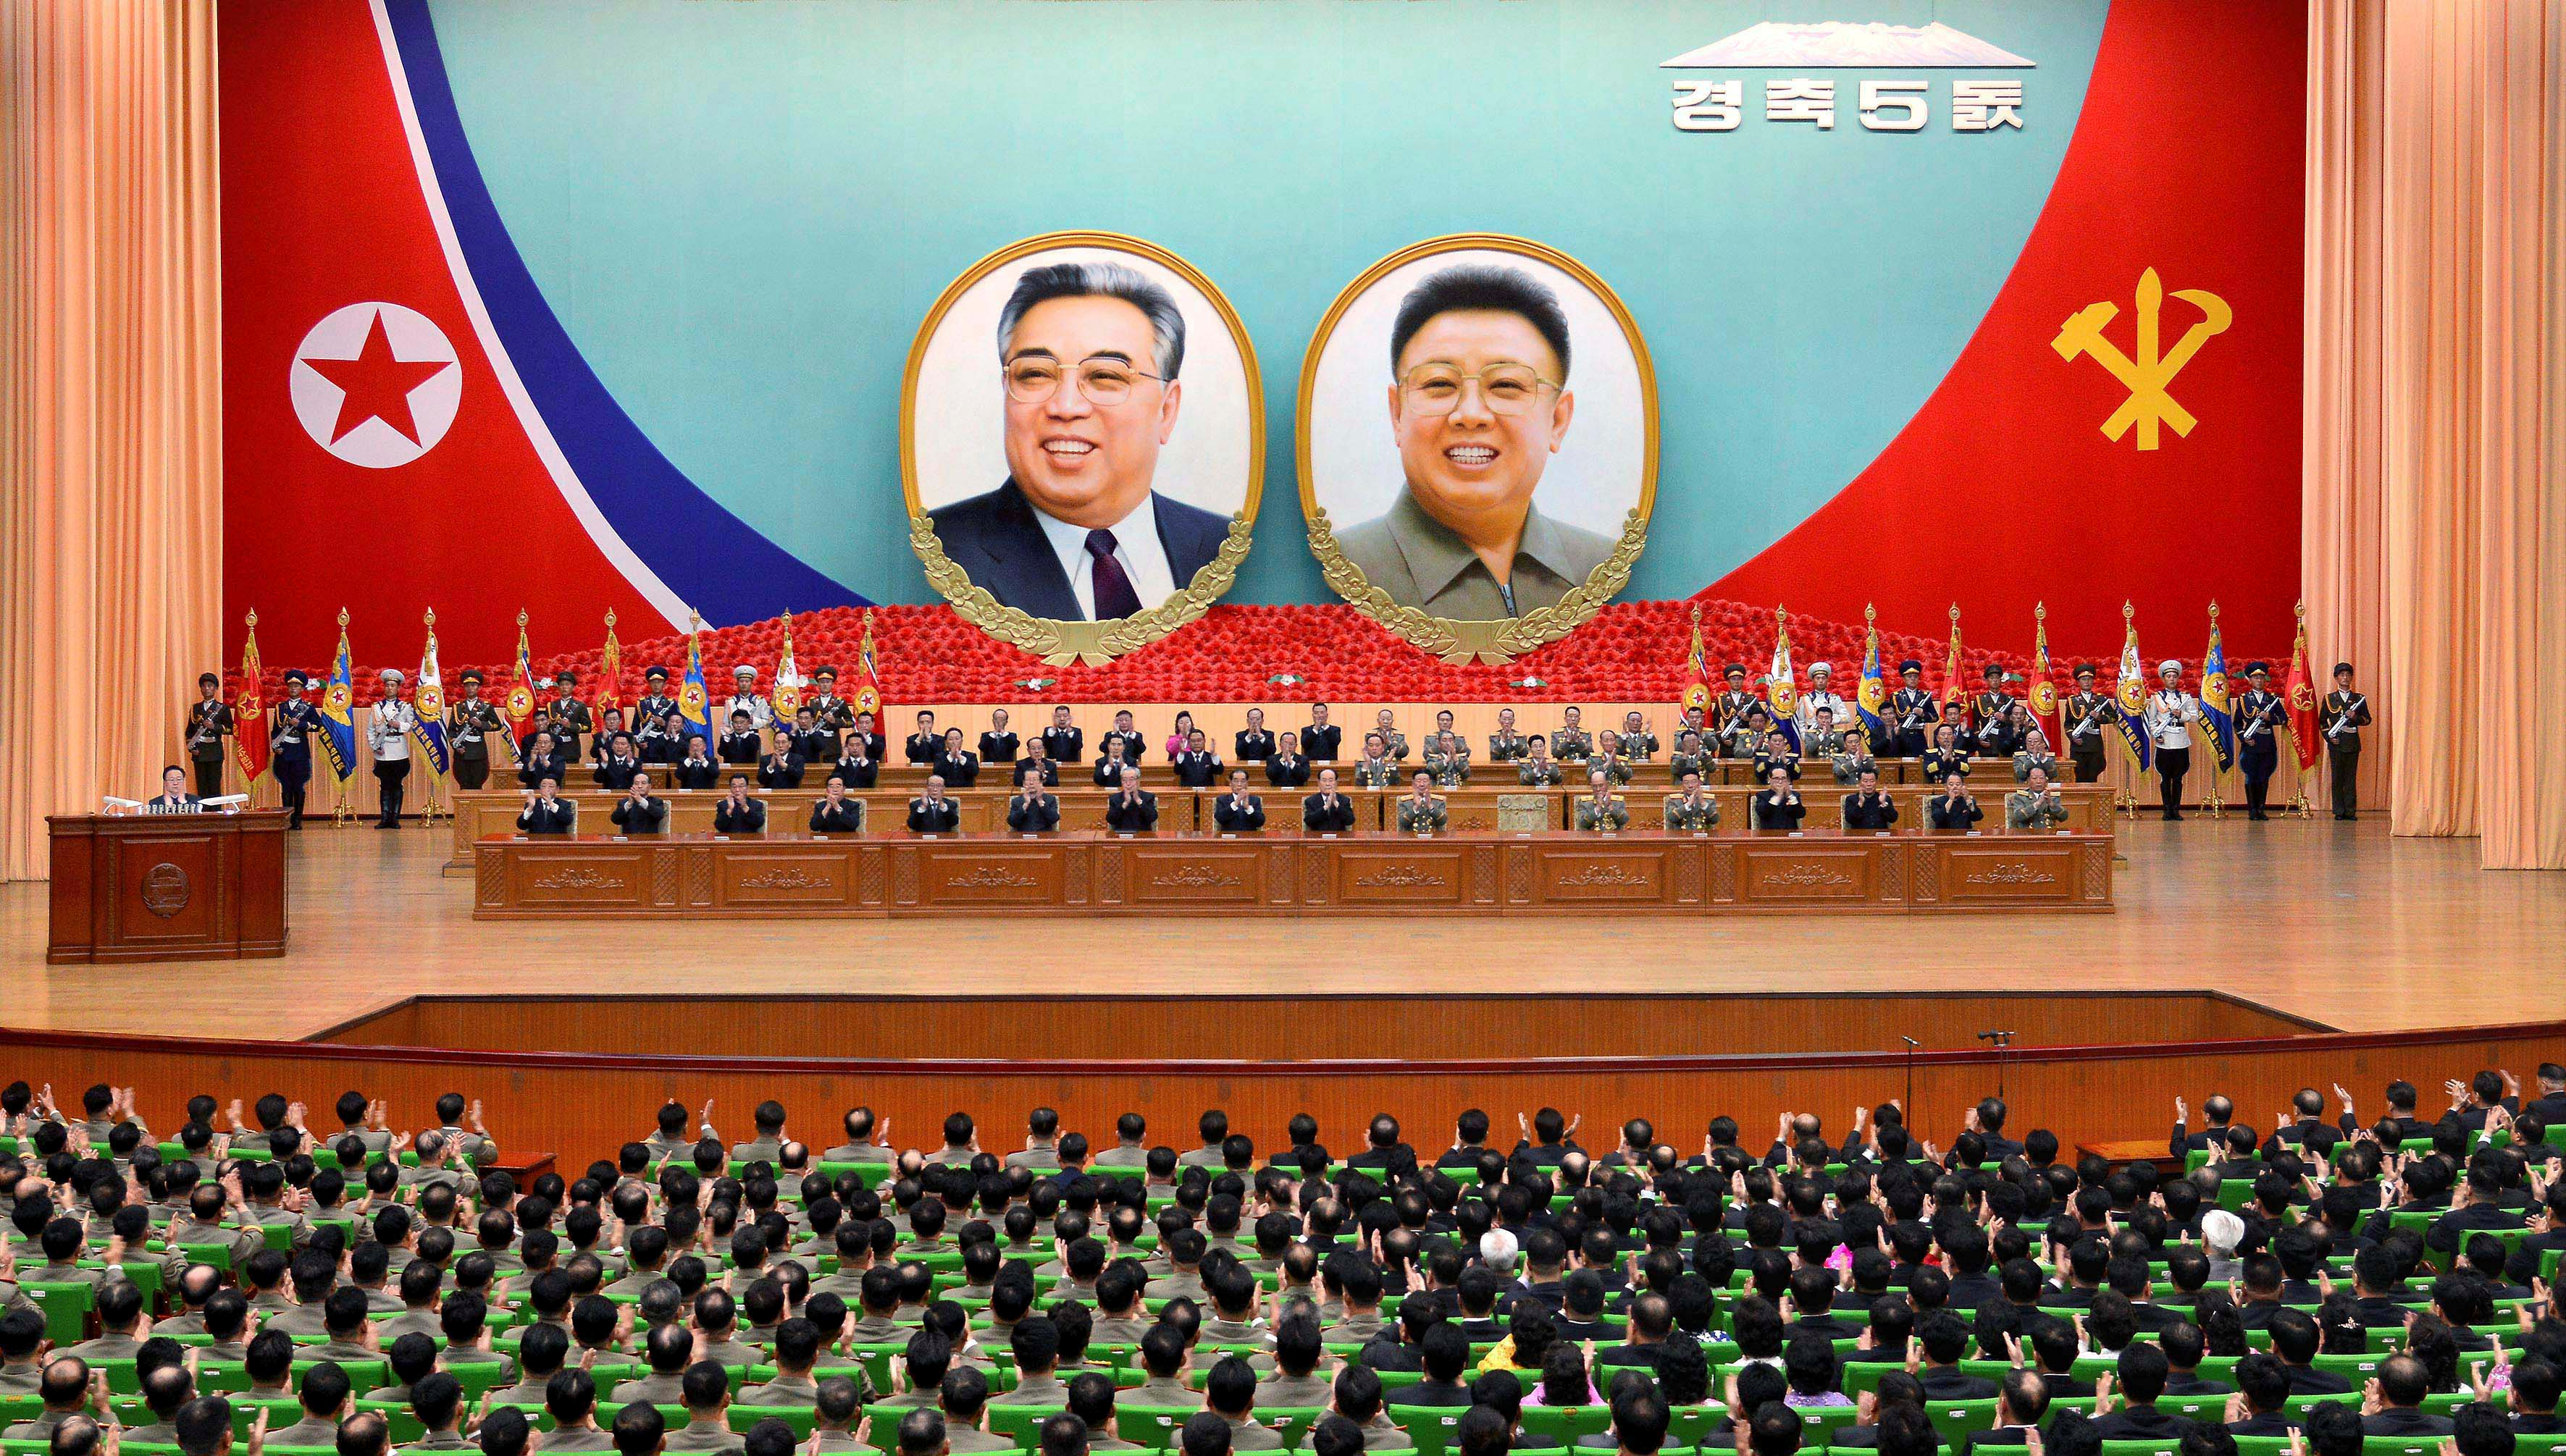 A general view of a national meeting took place to celebrate the 5th anniversary of leader Kim Jong Un's assumption of the top posts of the party and the state, in this undated photo released by North Korea's Korean Central News Agency (KCNA) in Pyongyang April 12, 2017. (KCNA/Reuters)